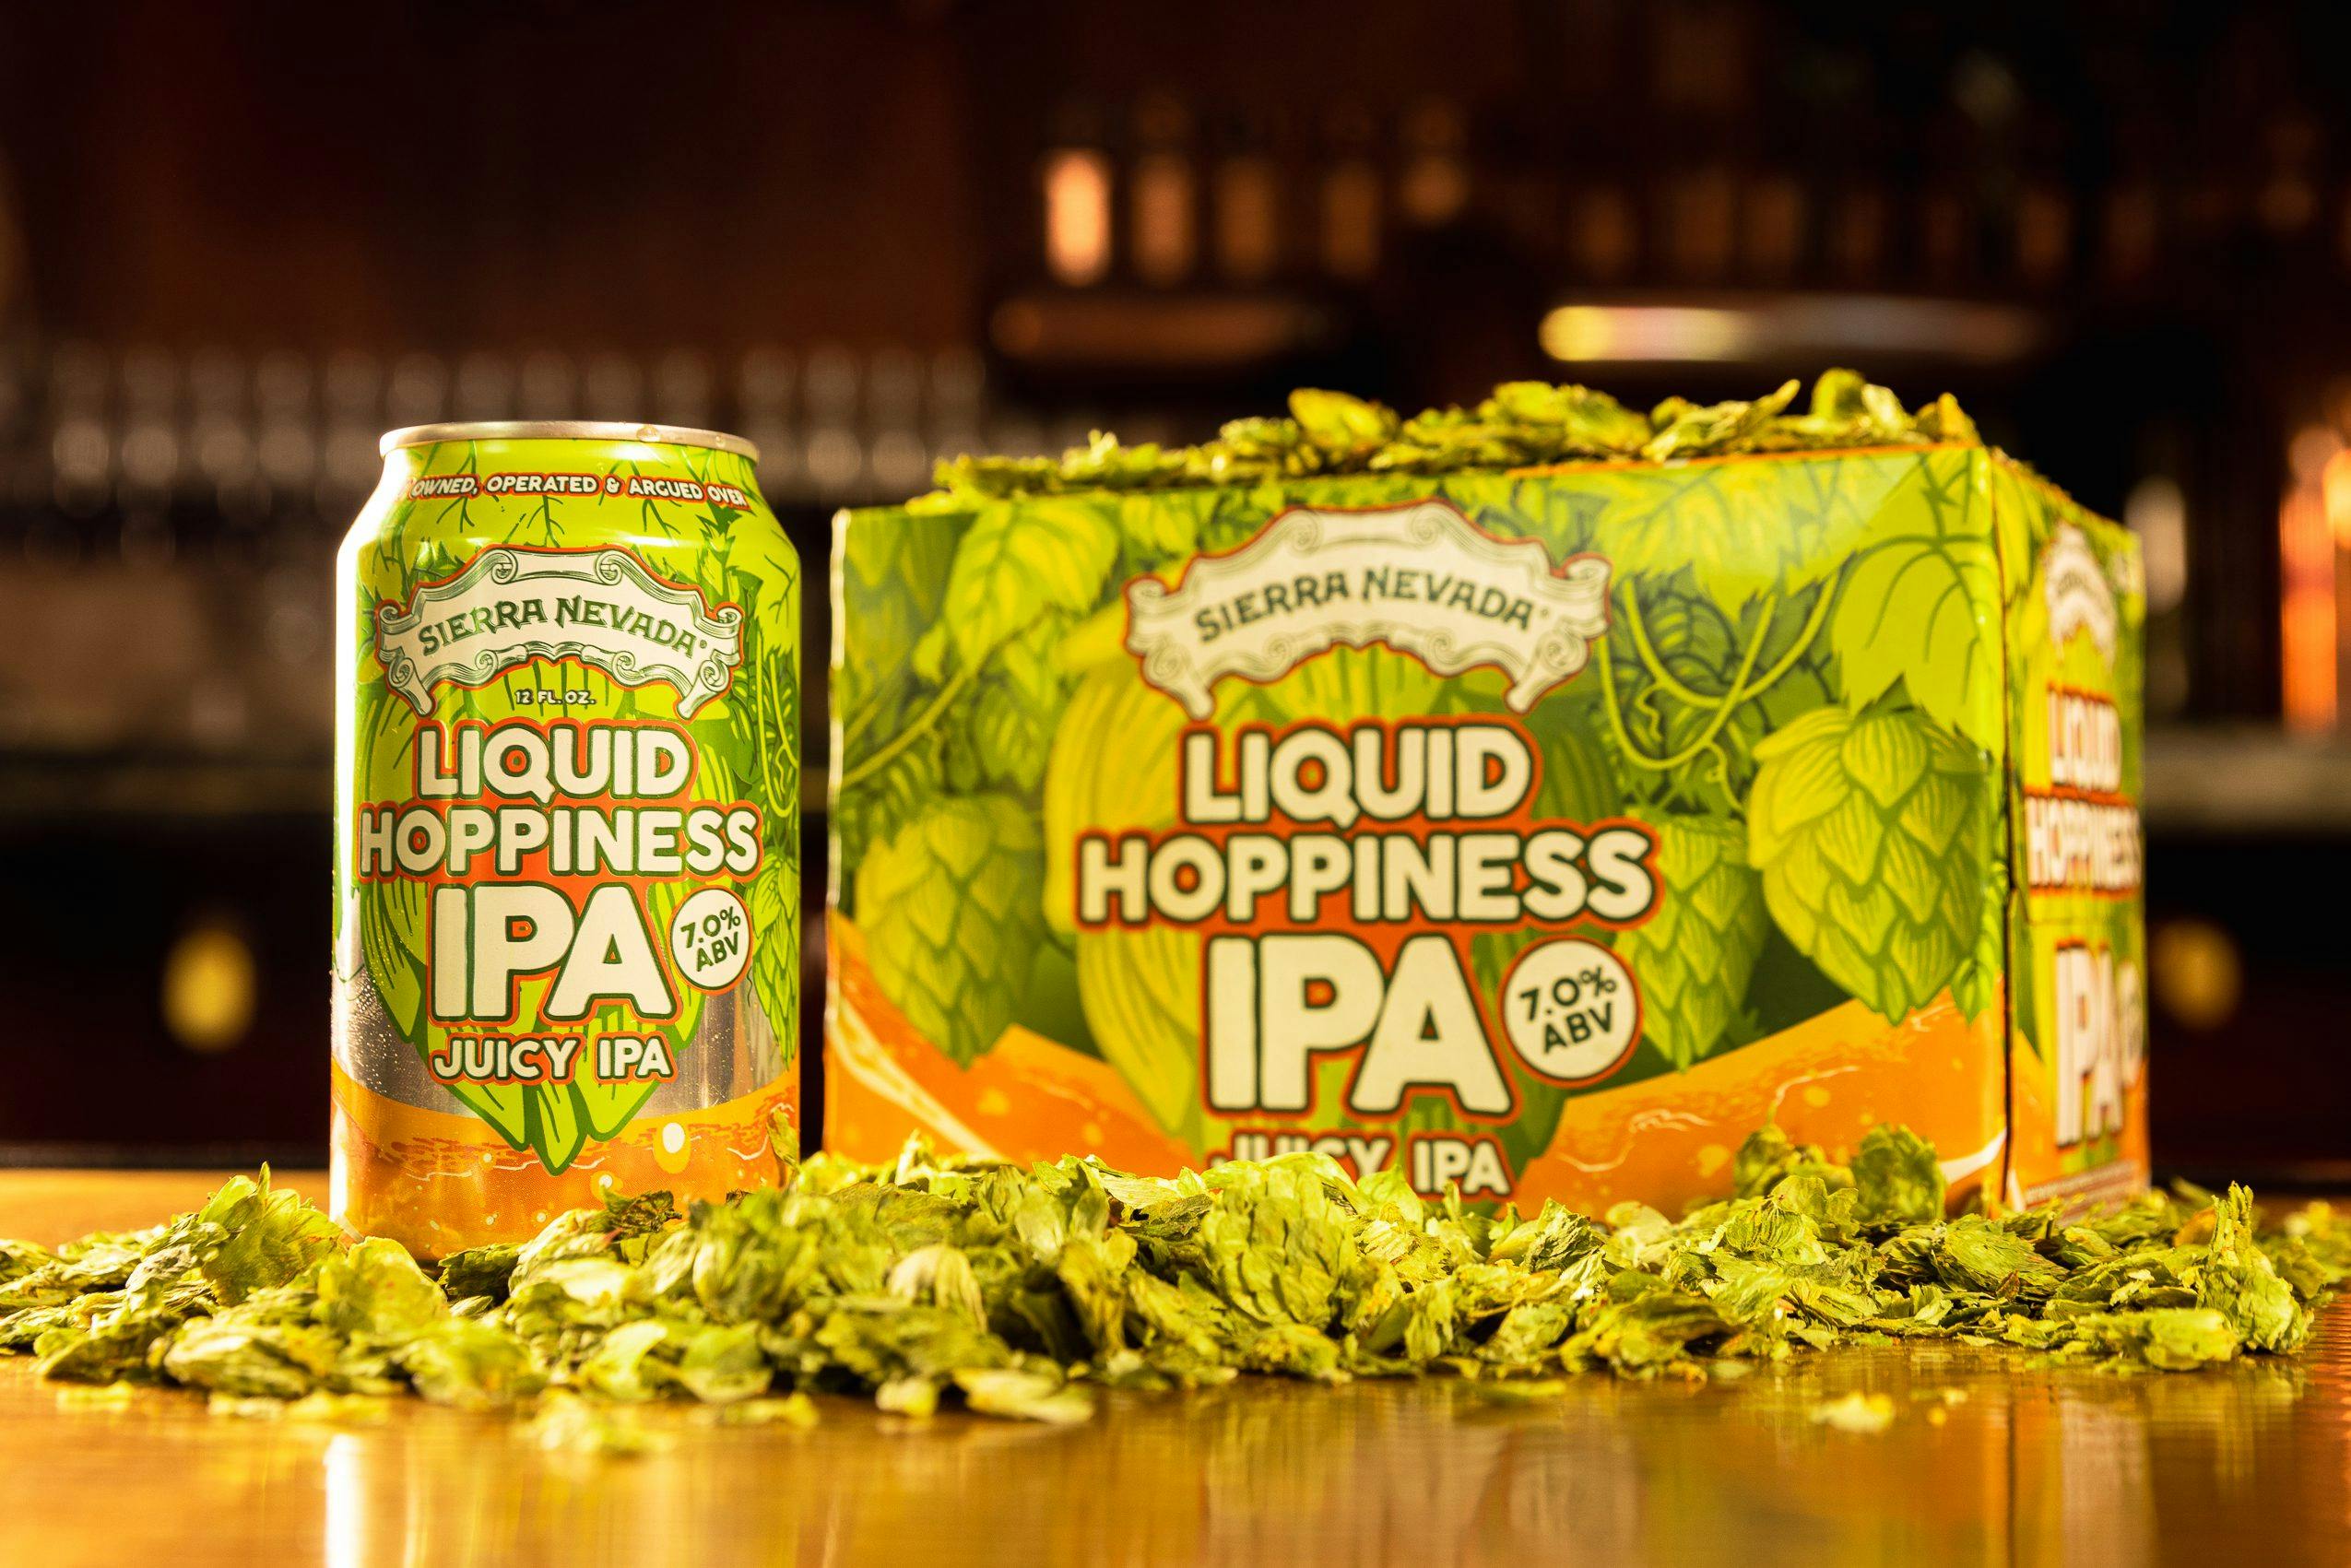 Liquid Hoppiness IPA beer can and pack on hops